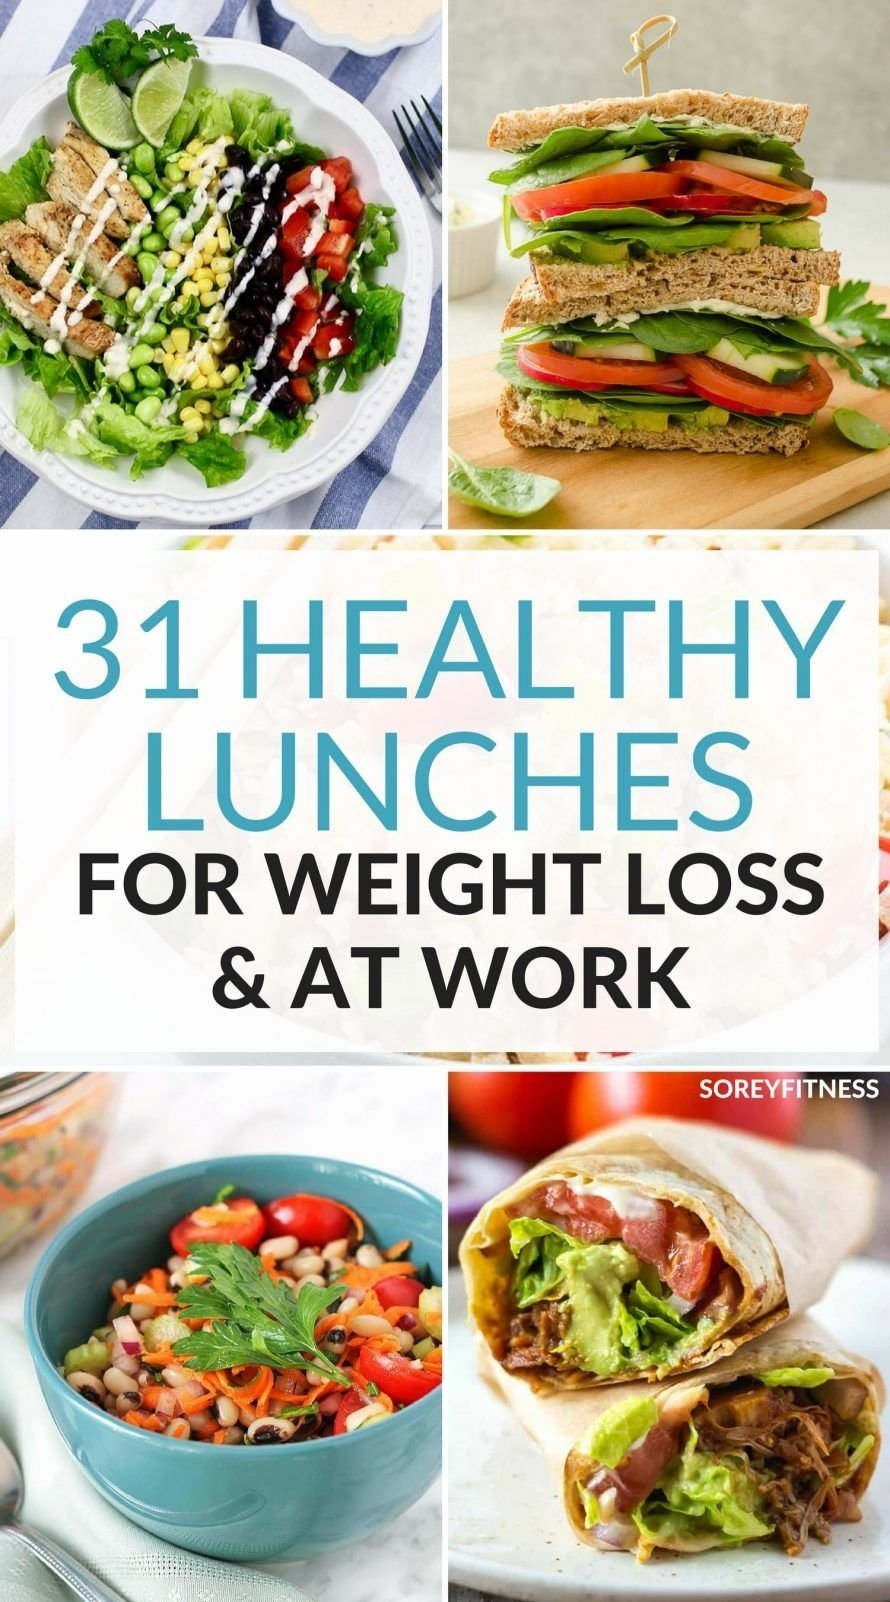 10 Most Healthy Lunch Ideas For Work To Lose Weight 2022